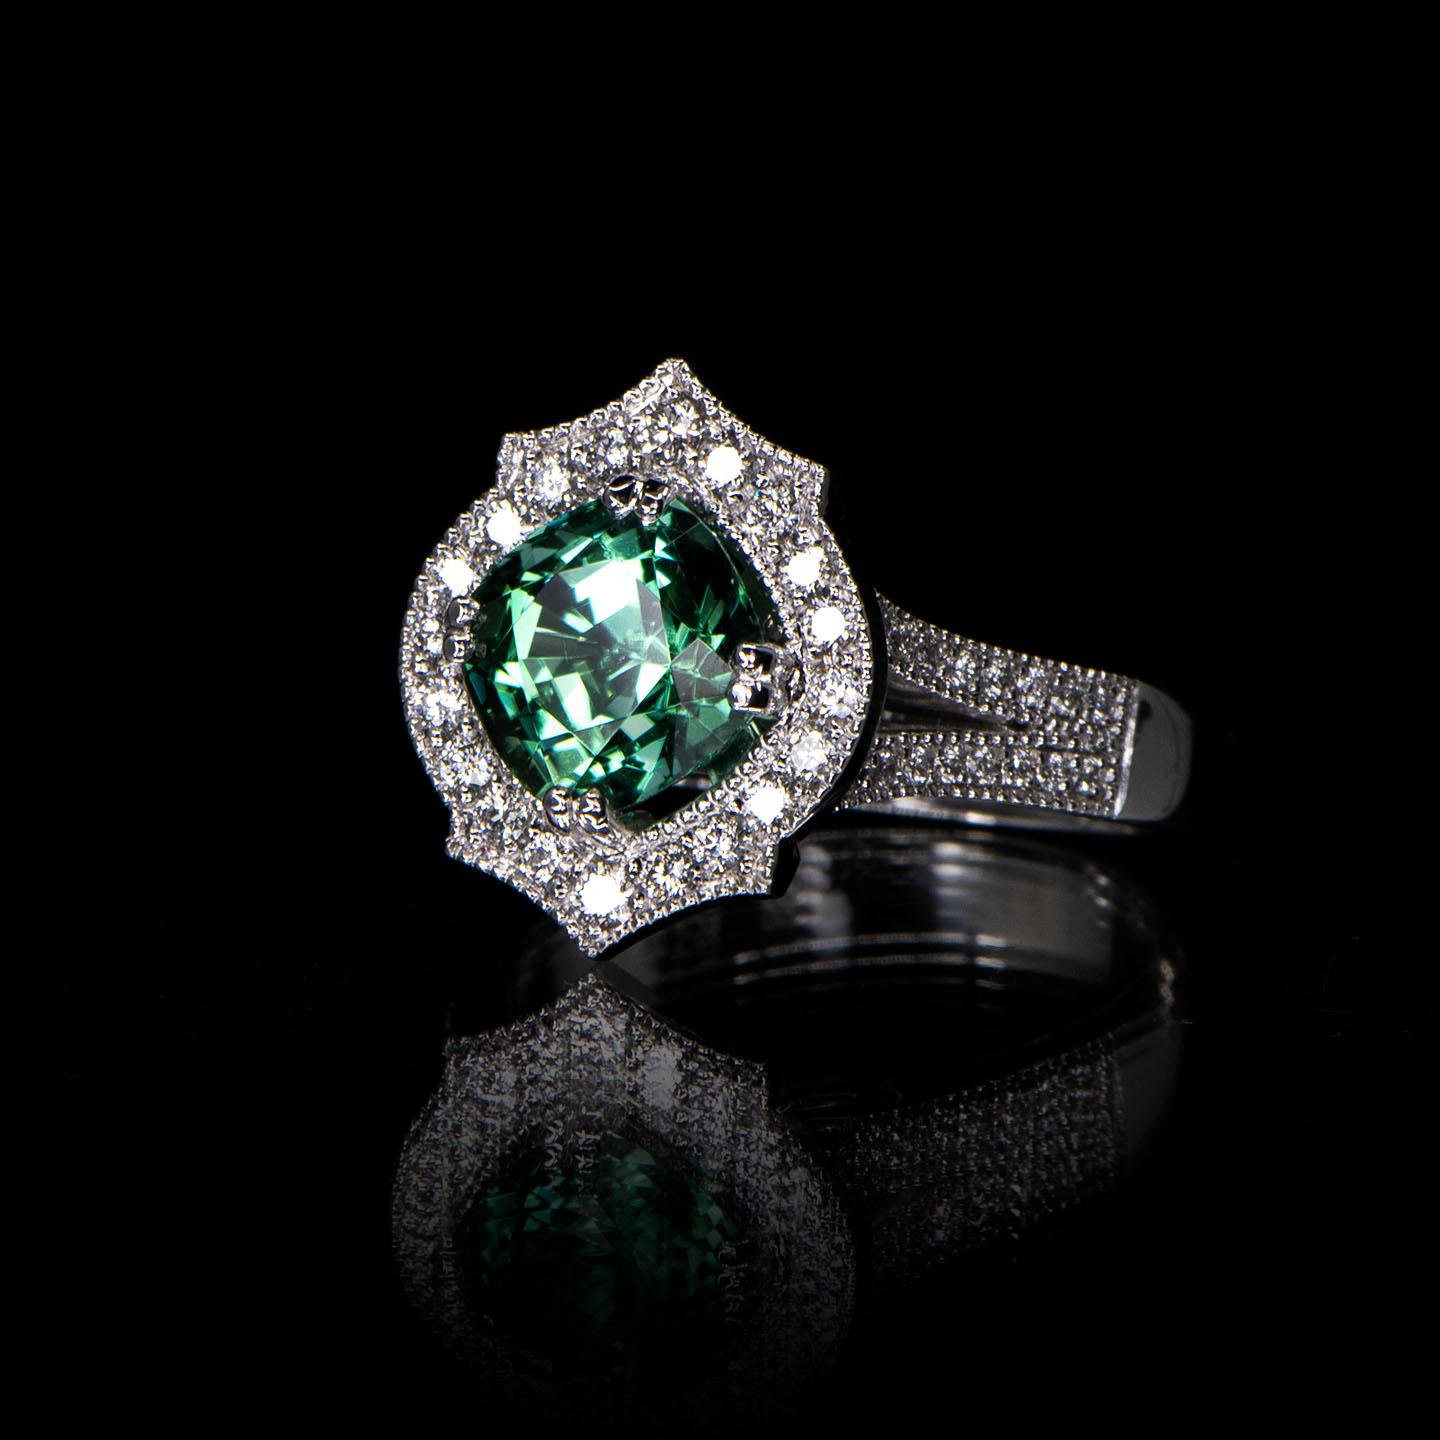 Part of the brand new 'Mauresque' collection by Natalie Barney, this cluster engagement ring features a 2.59 carat Namibian Green Cushion Cut Tourmaline and 52 round white diamonds with a total weight of 0.46 carat (Colour F, Clarity VS). The